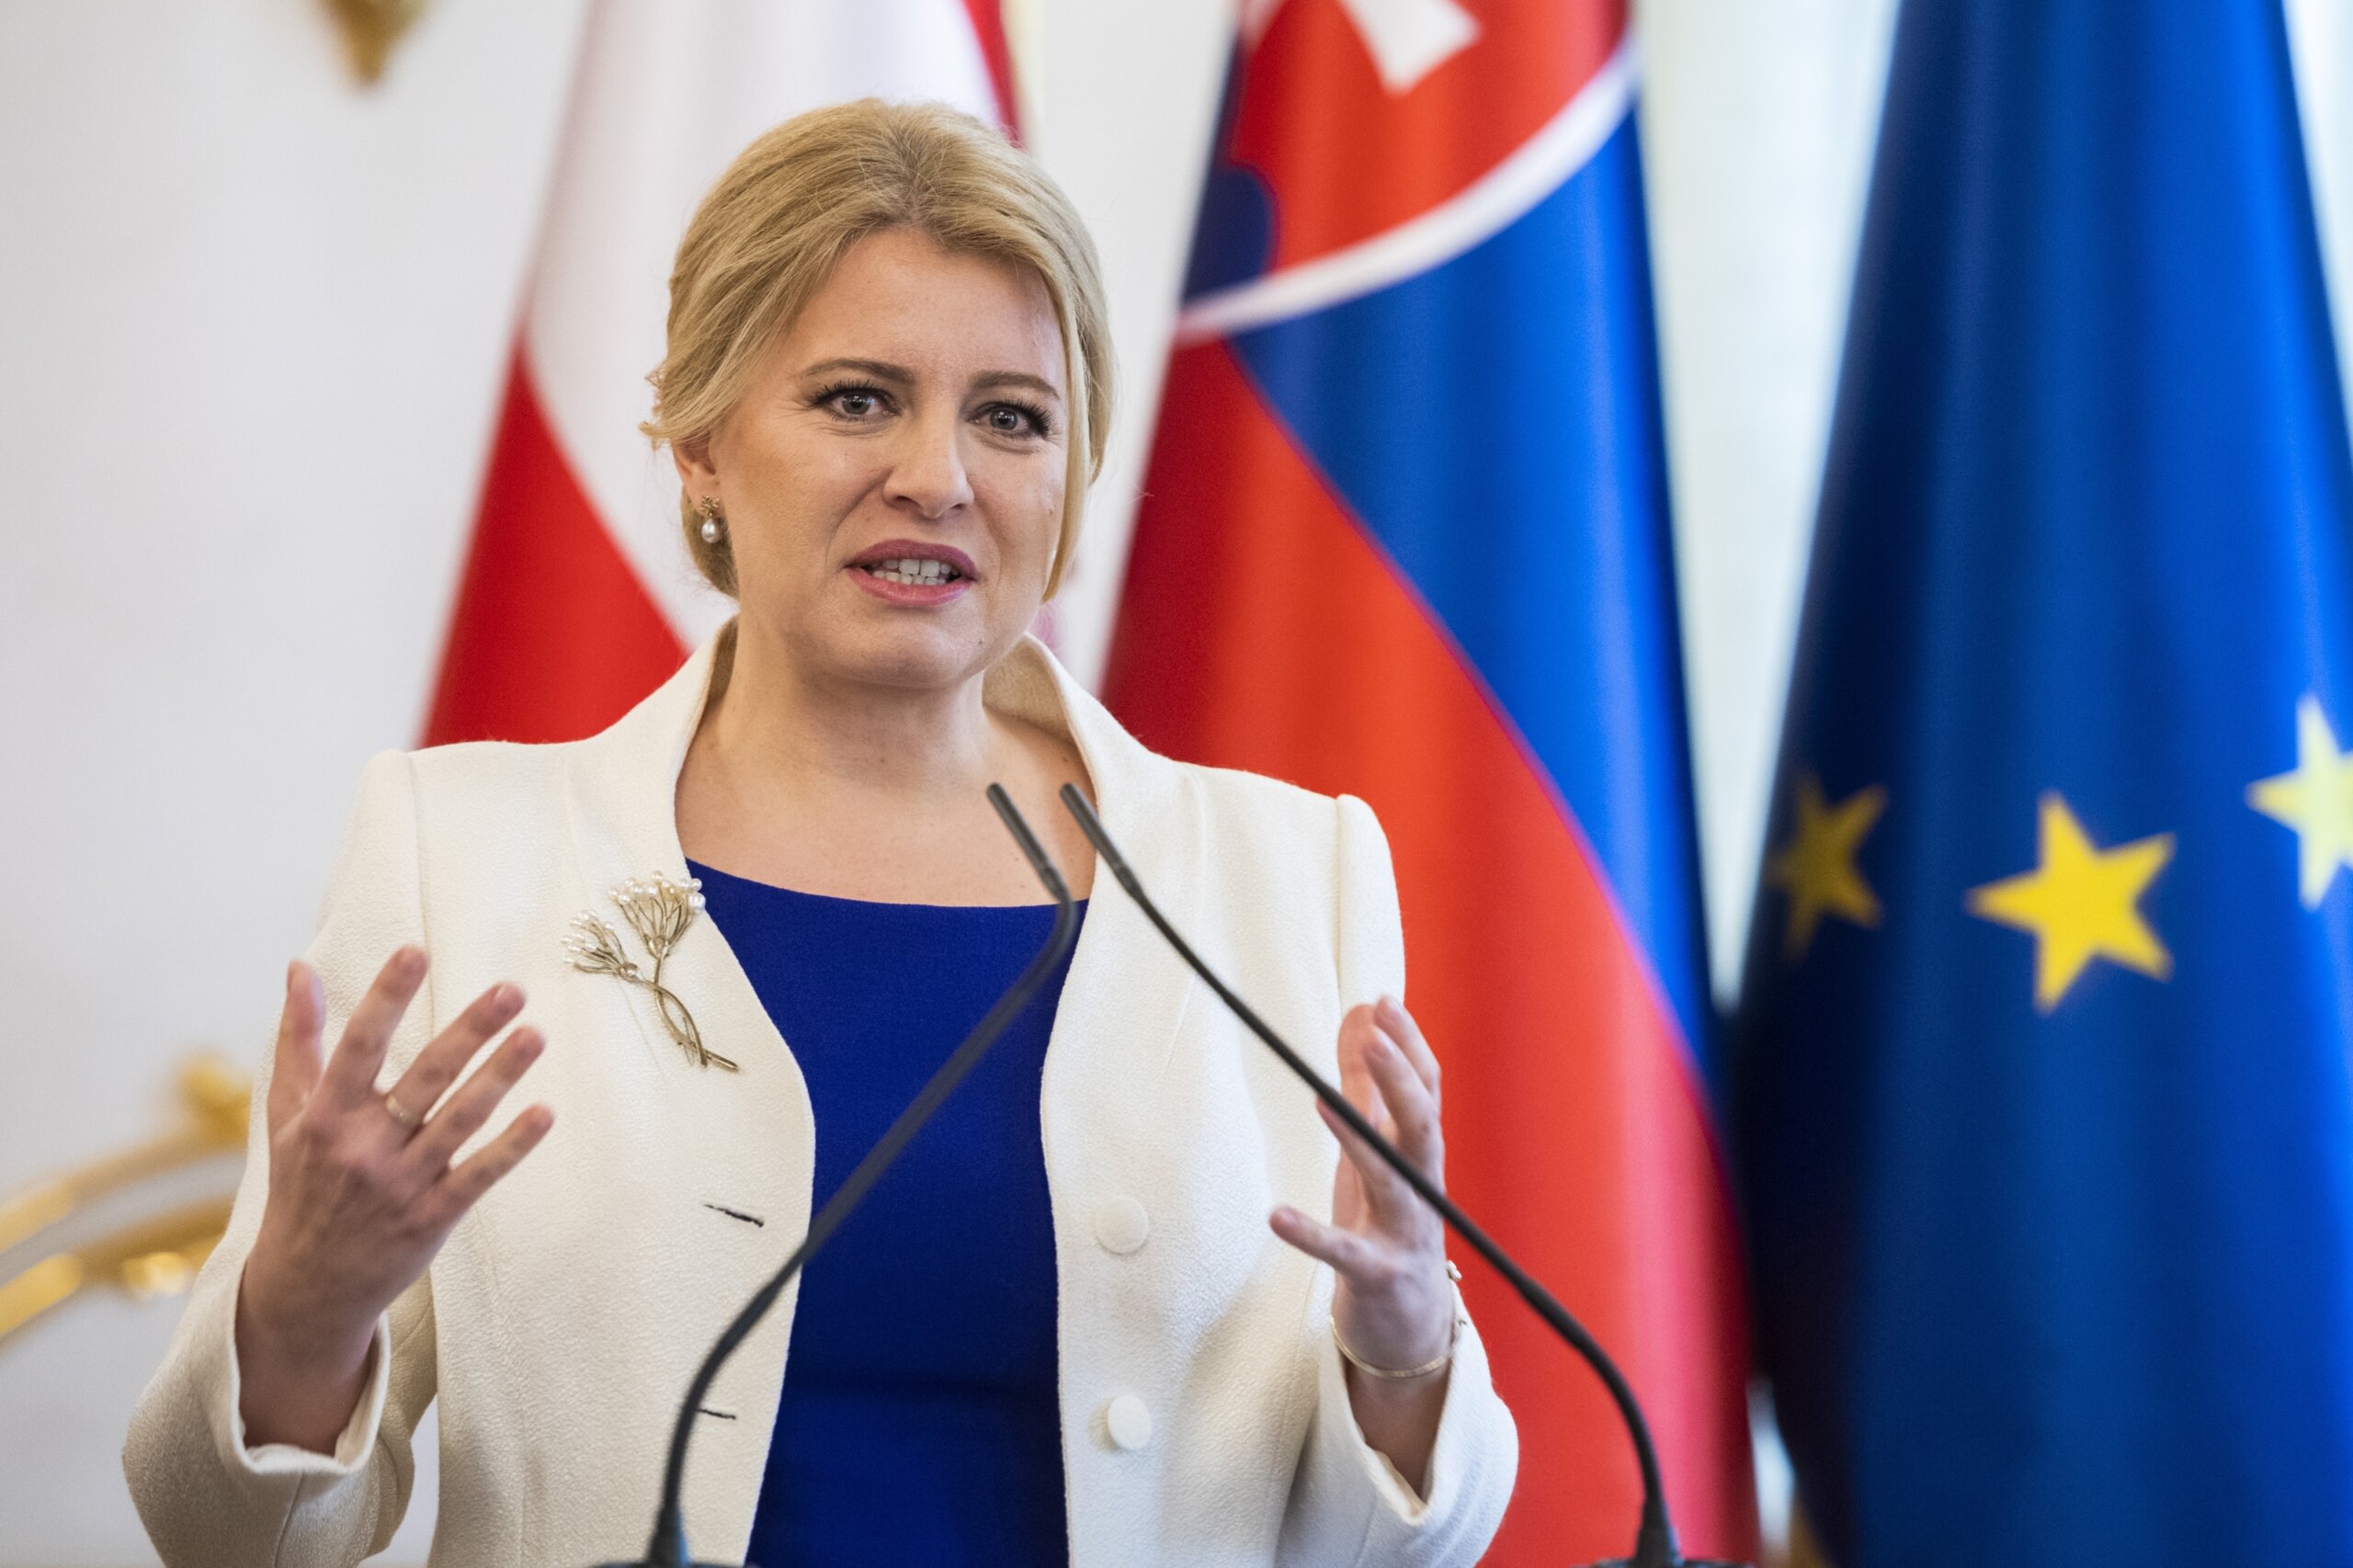 Slovakia’s parliament sets early election for Sept 30